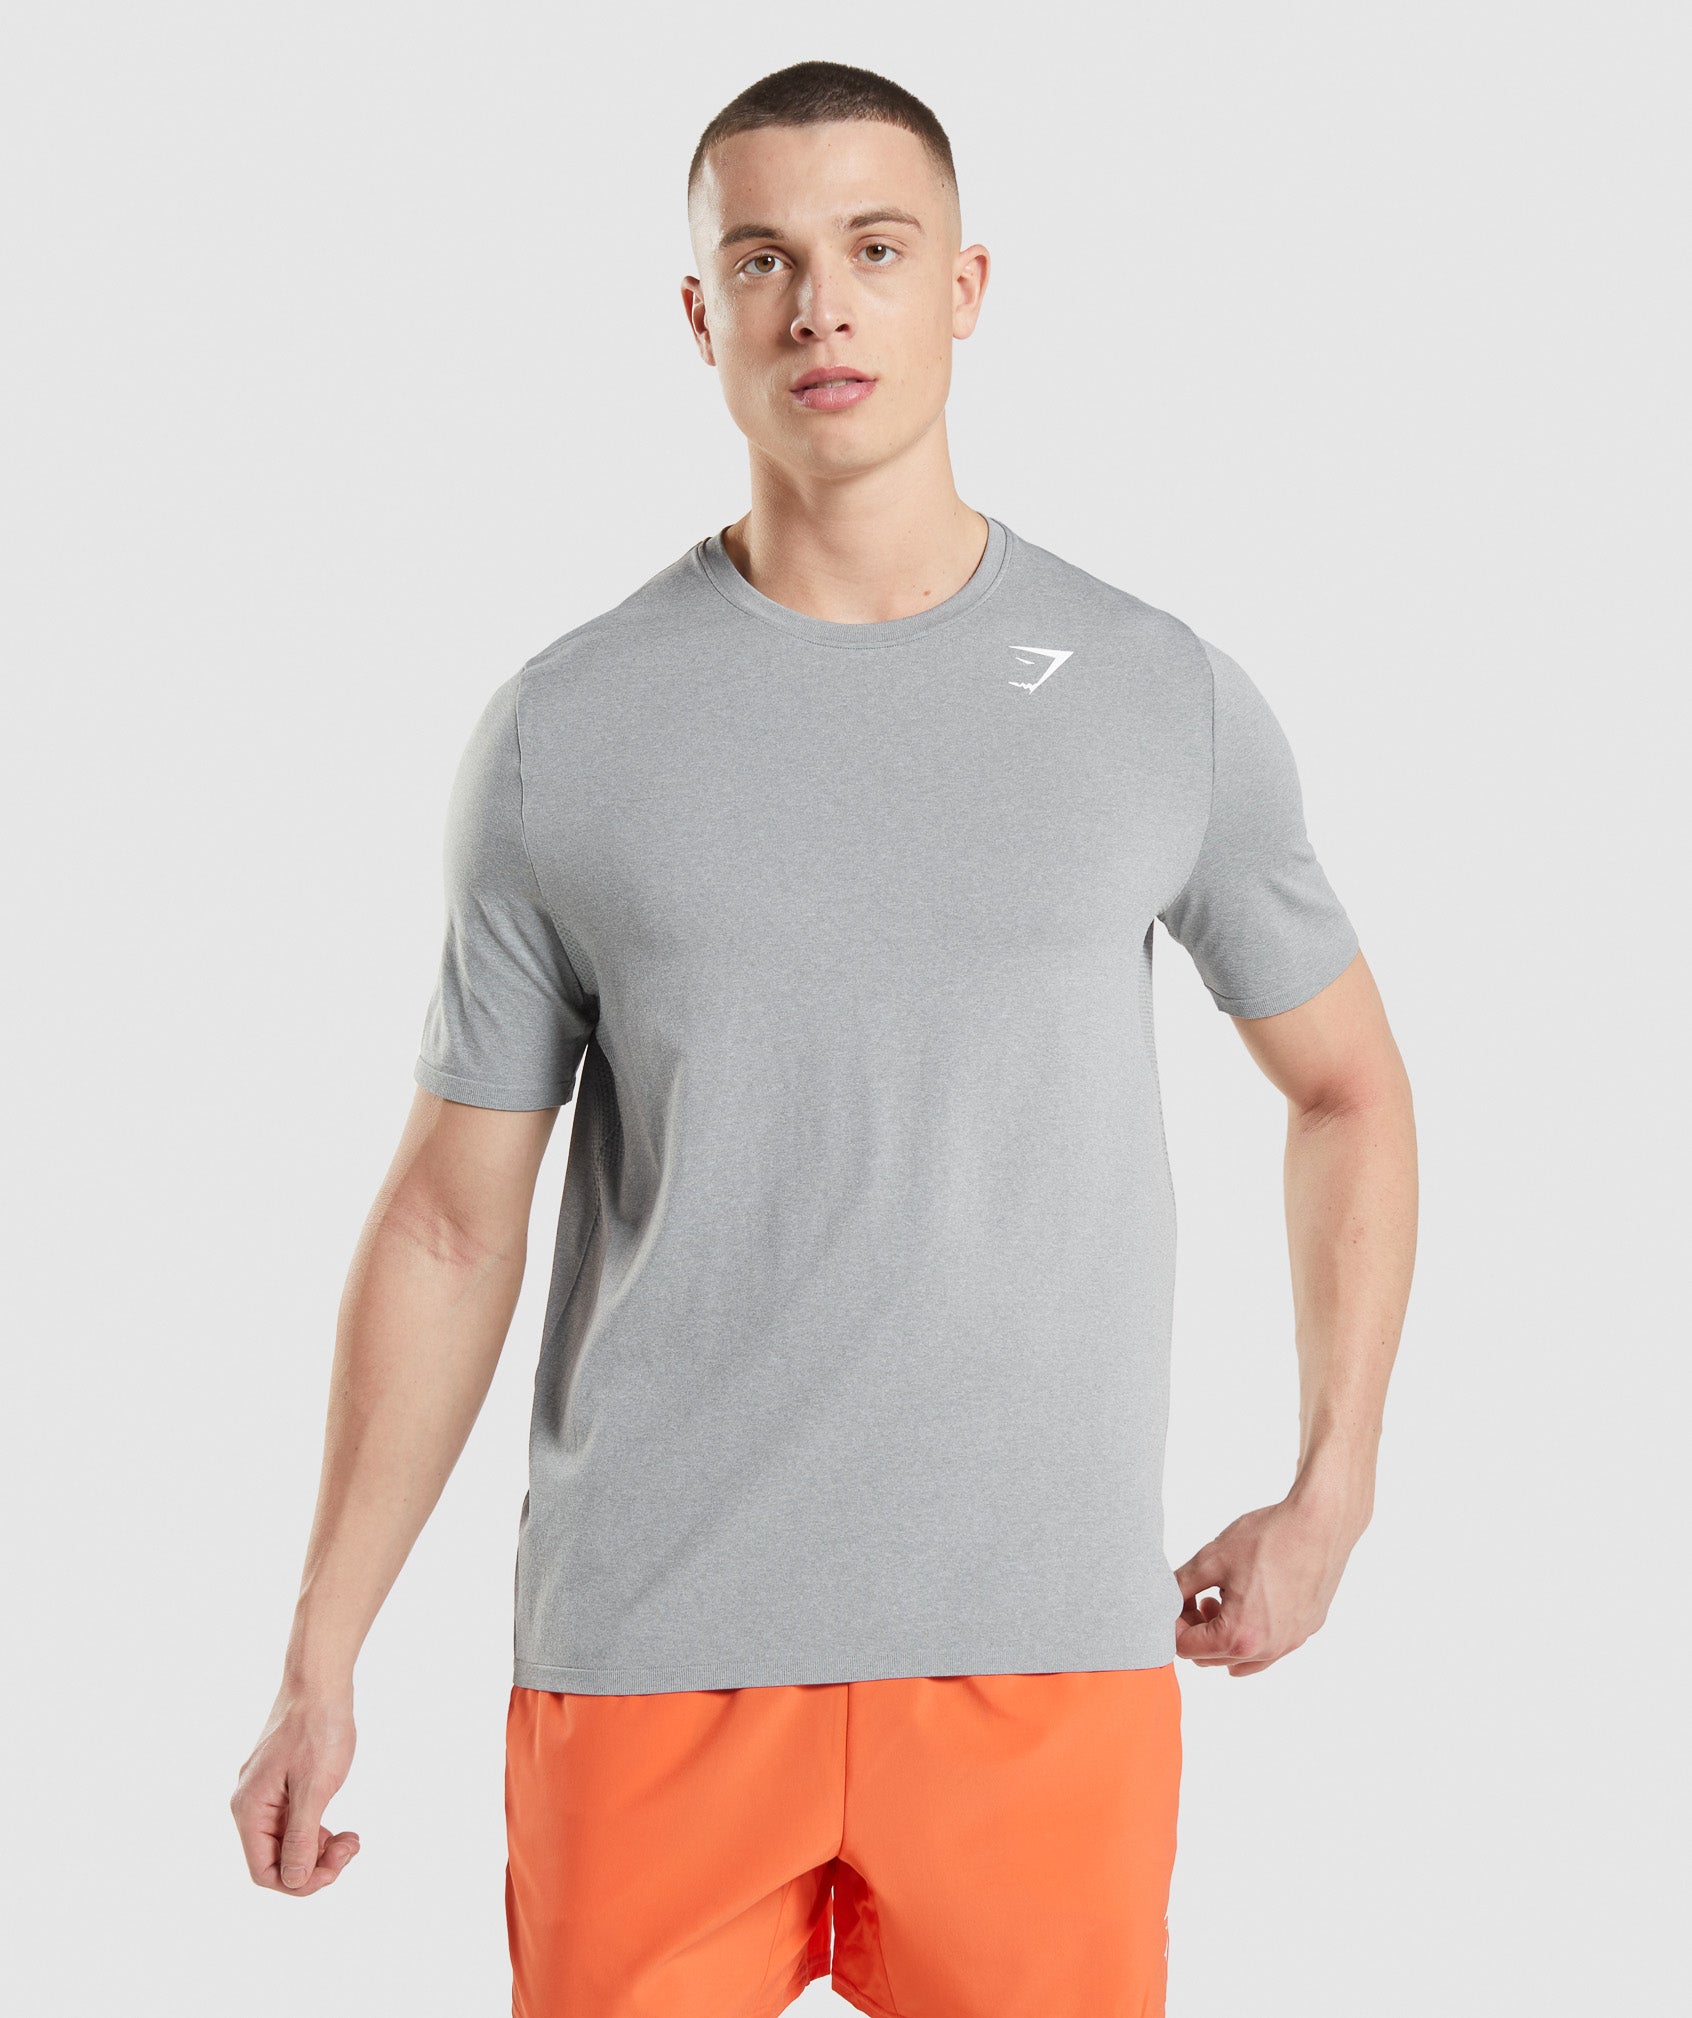 Arrival Seamless T-Shirt in Grey